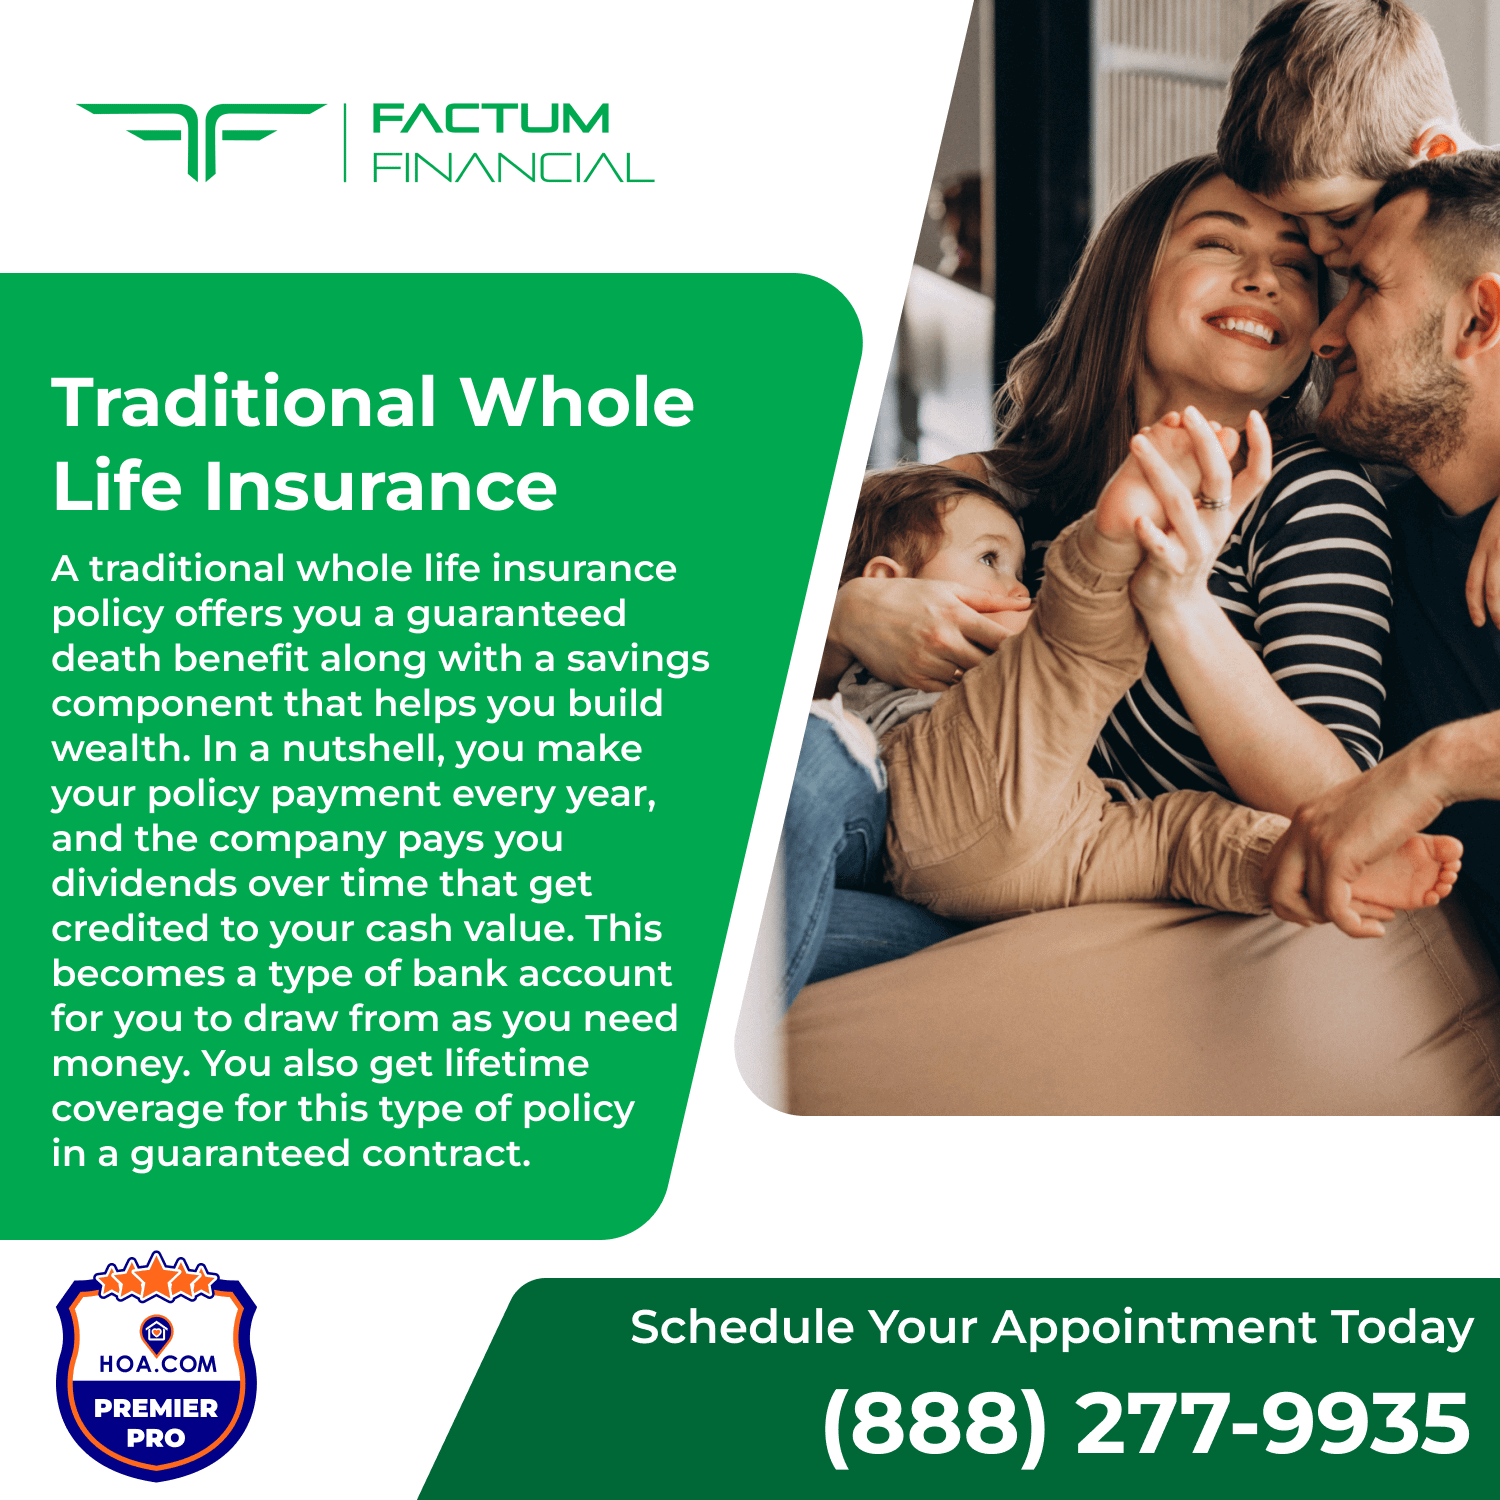 Traditional Whole Insurance Factum Financial